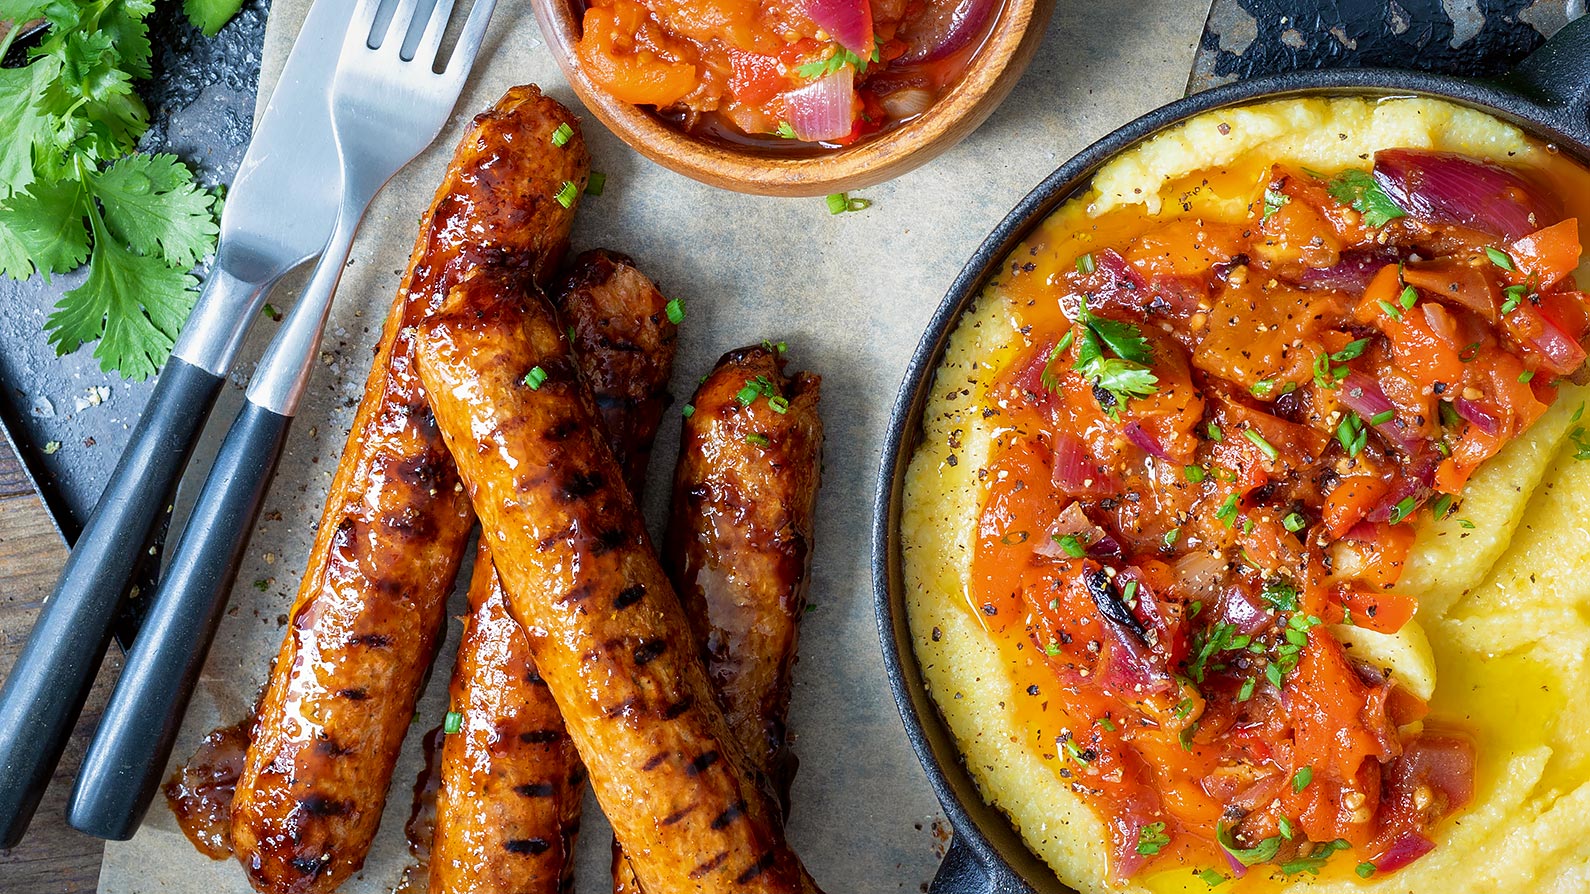 Boerewors with Roasted Red Pepper Salsa